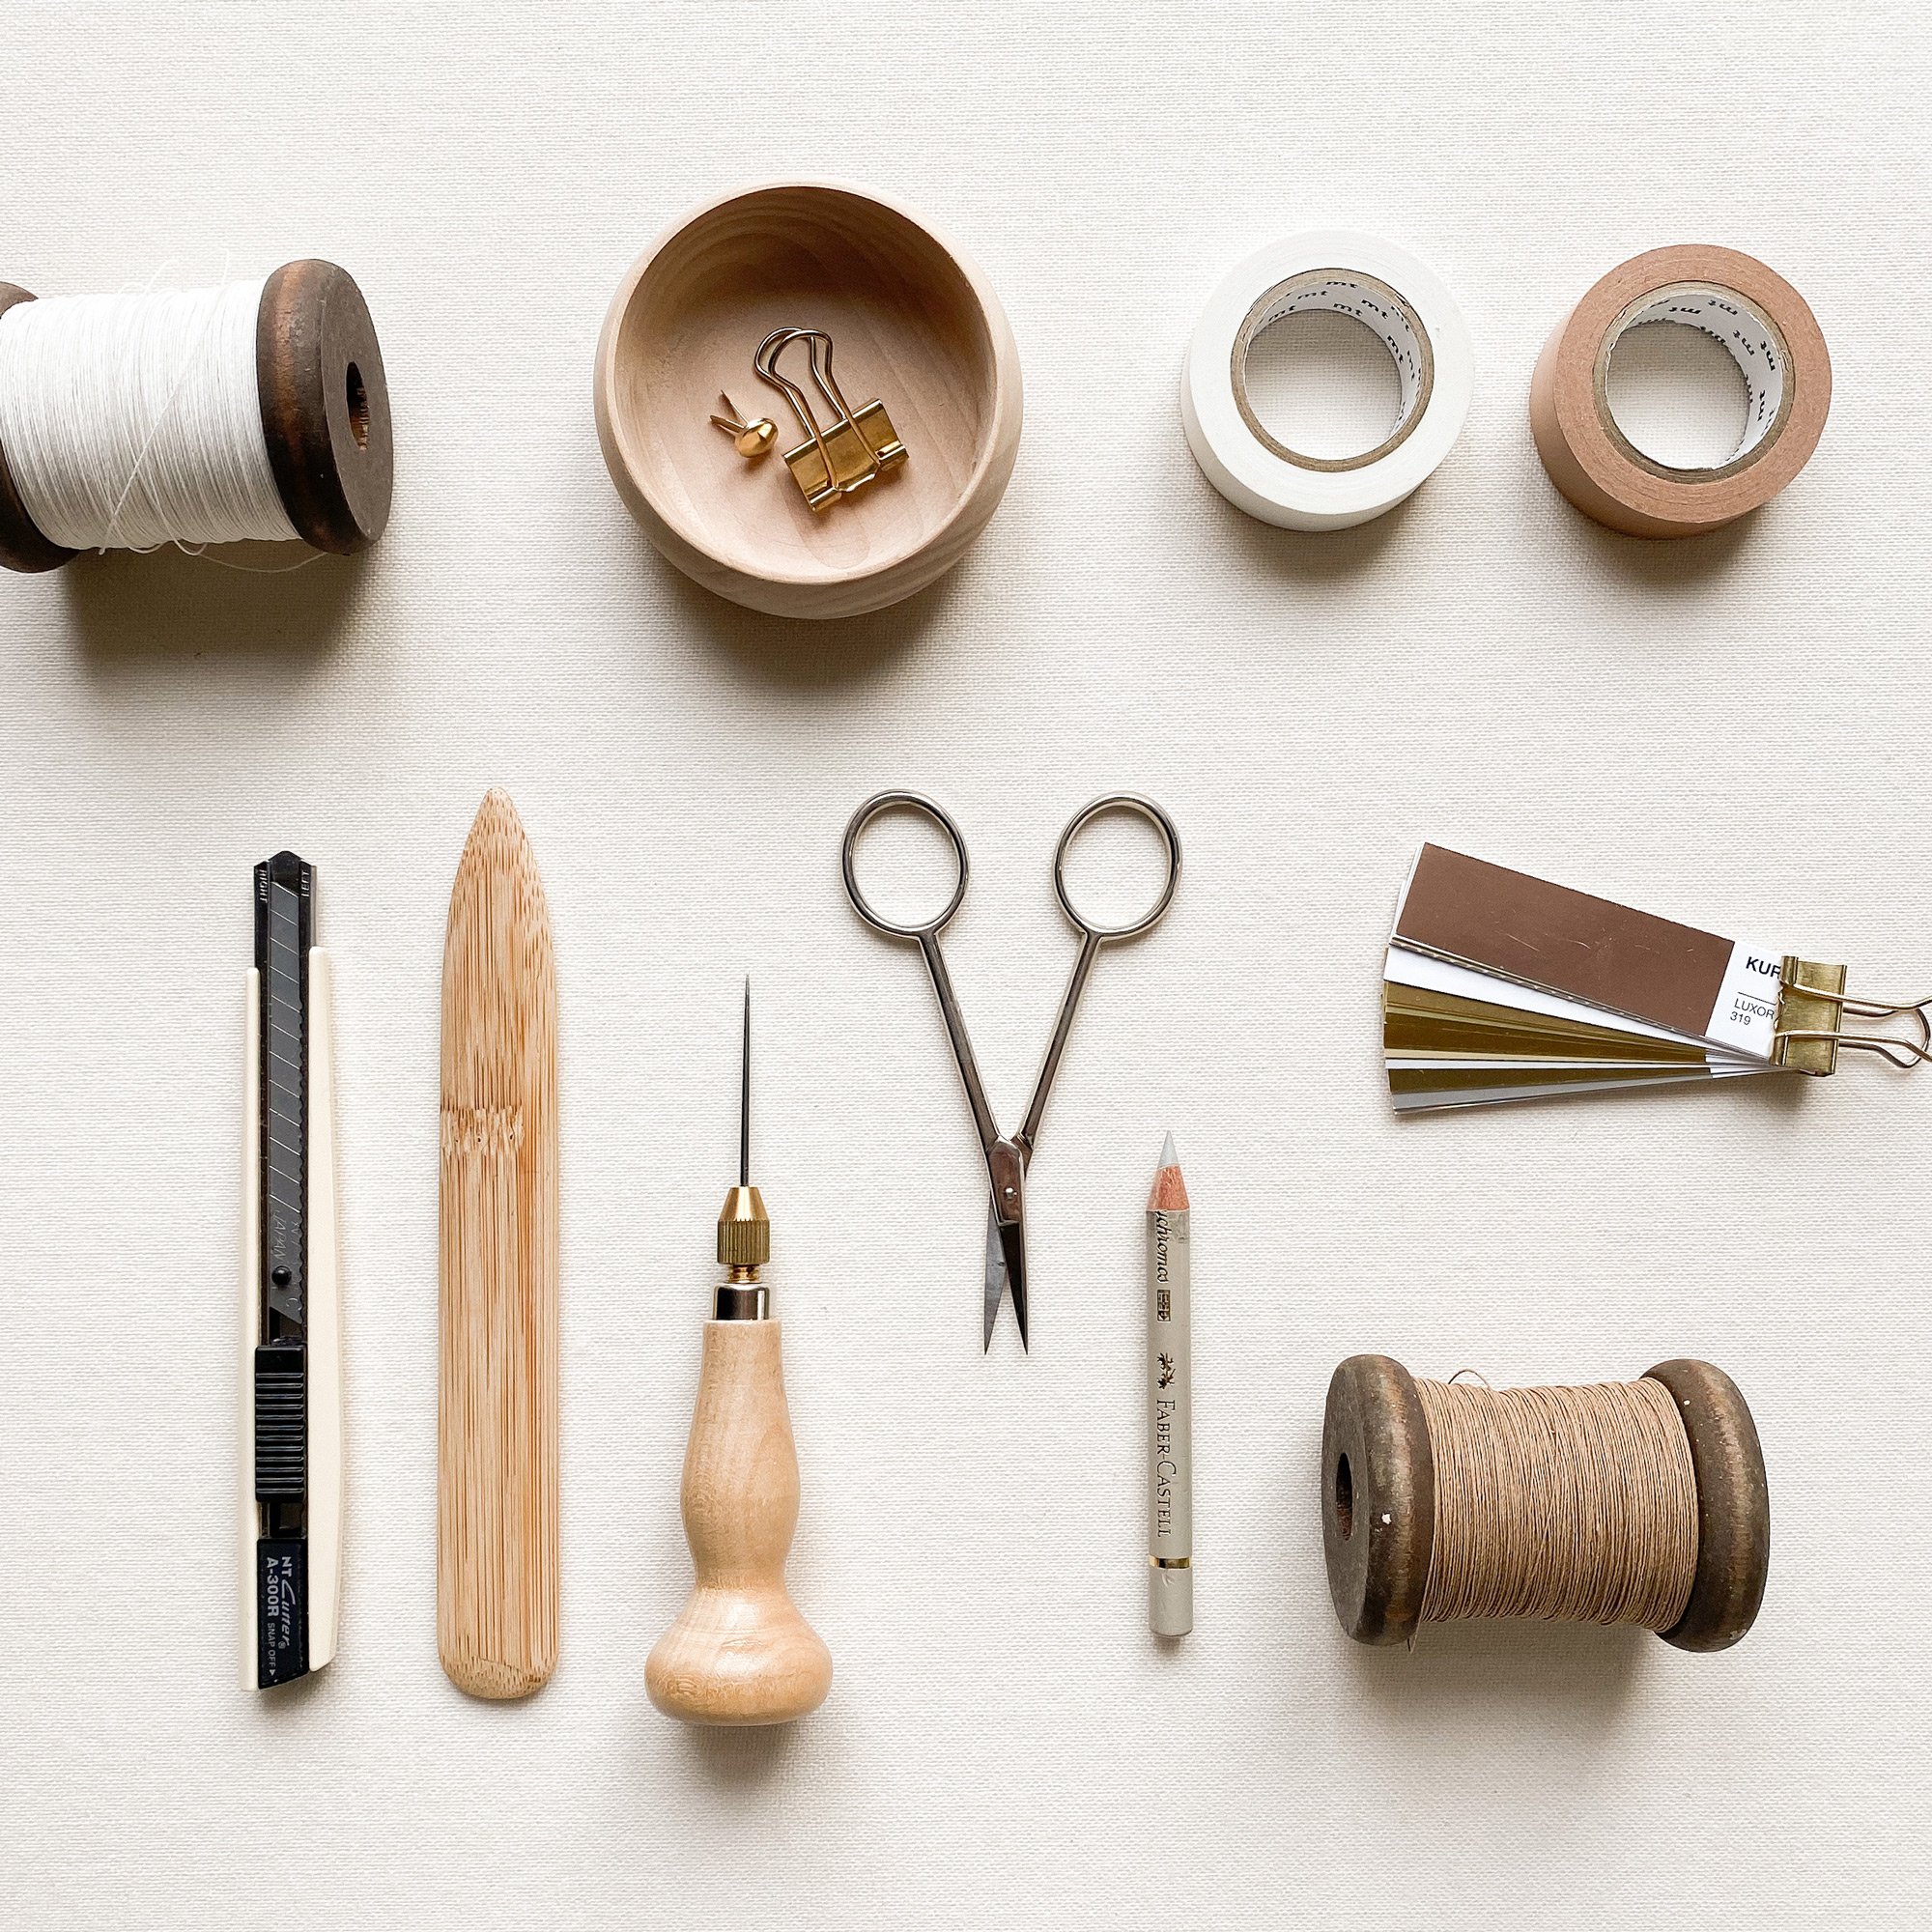 Tools we love to use